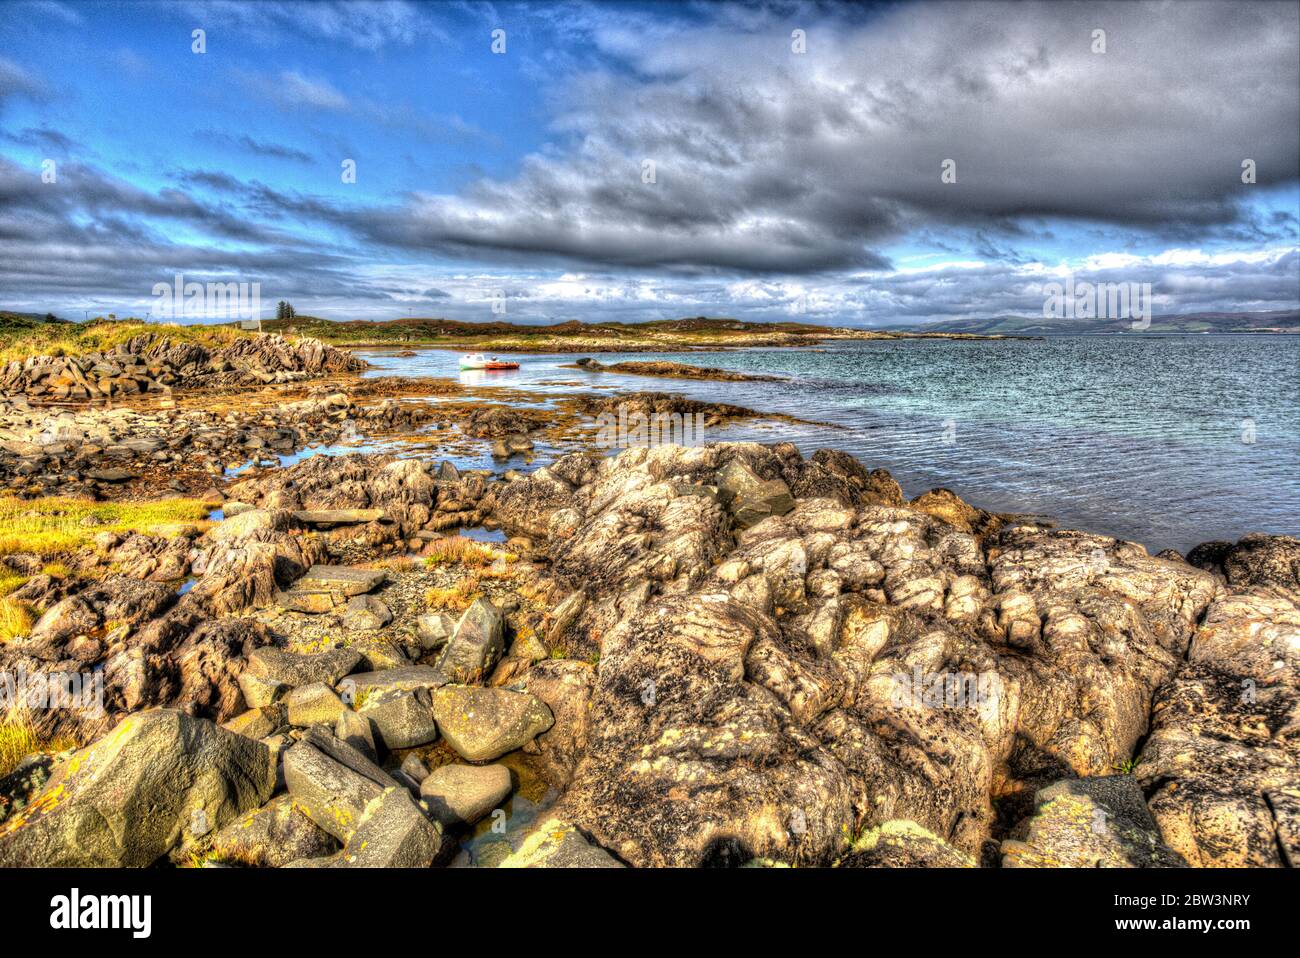 Isle of Gigha, Scotland. Artistic tranquil view of the coastline at Ardminish Bay, on the Isle of Gigha. Stock Photo